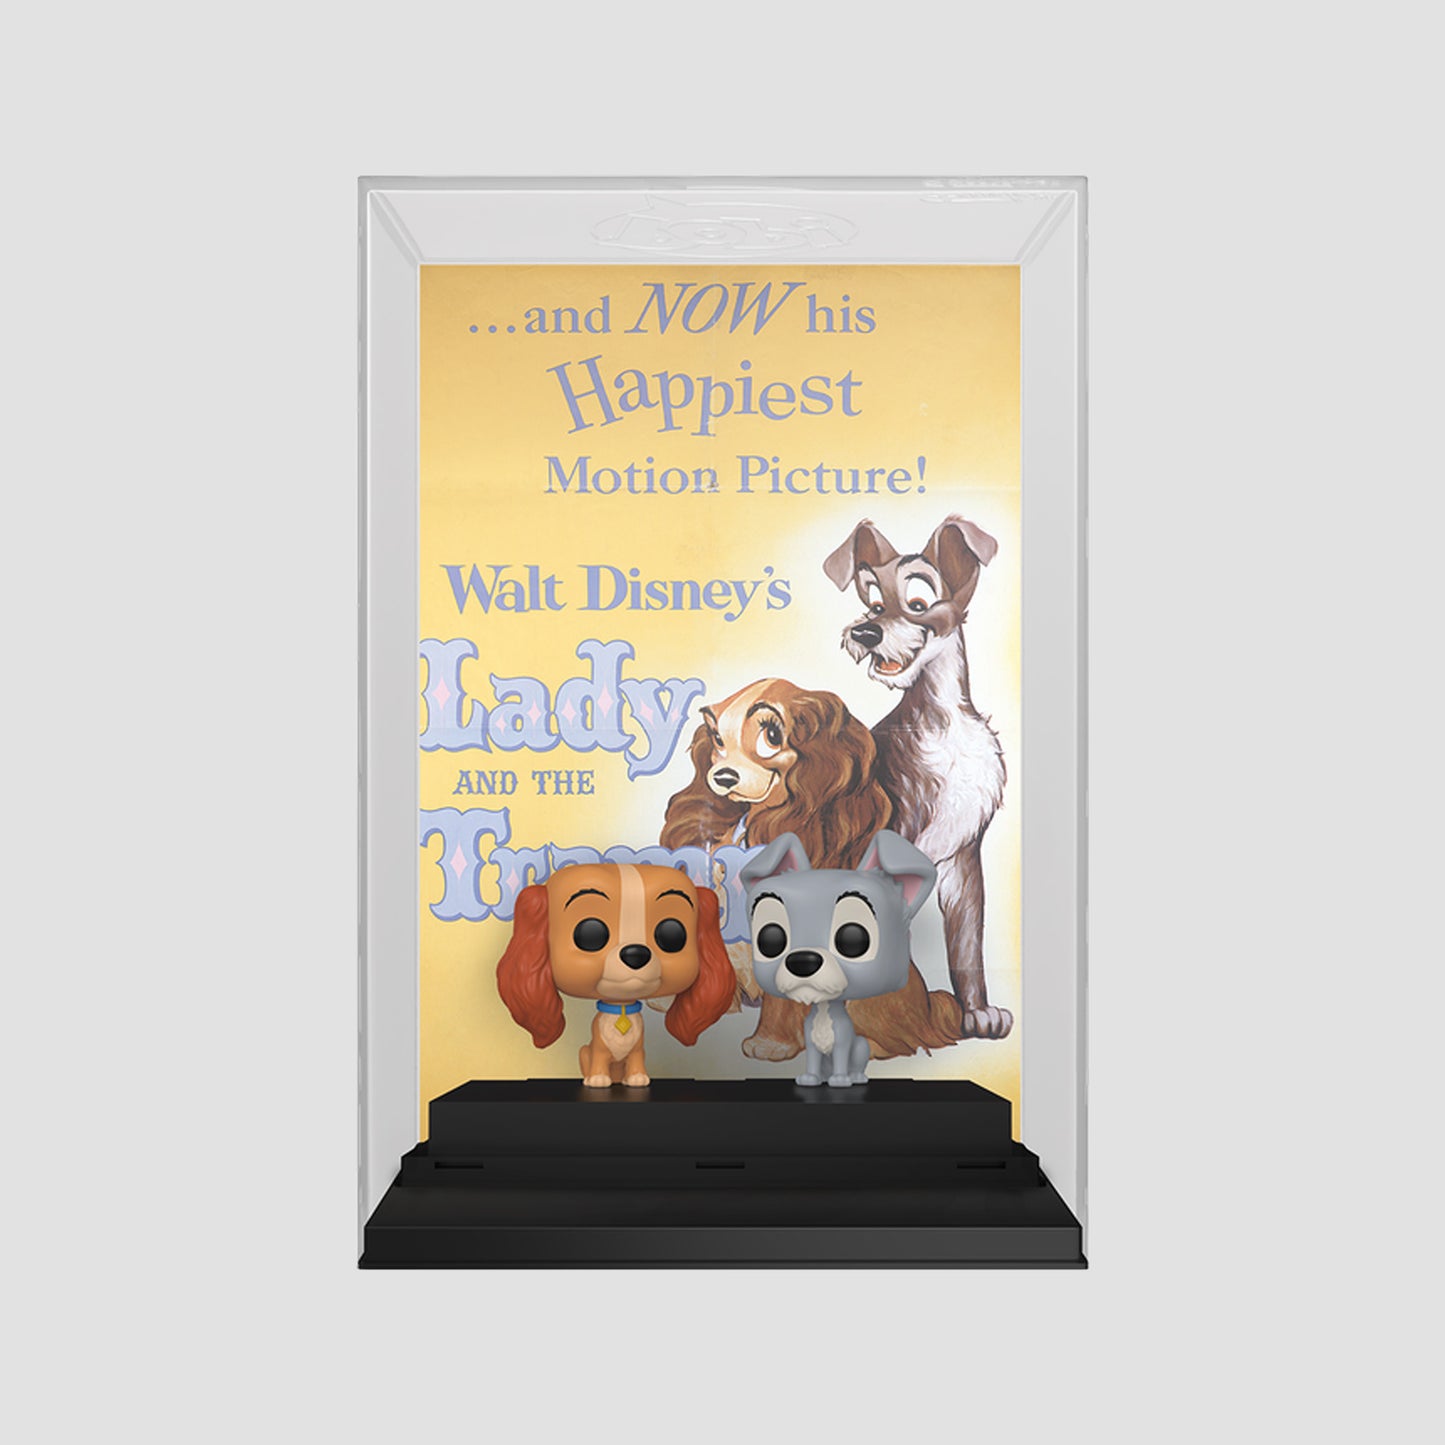 Lady and the Tramp (Disney 100) Movie Poster Funko Pop!